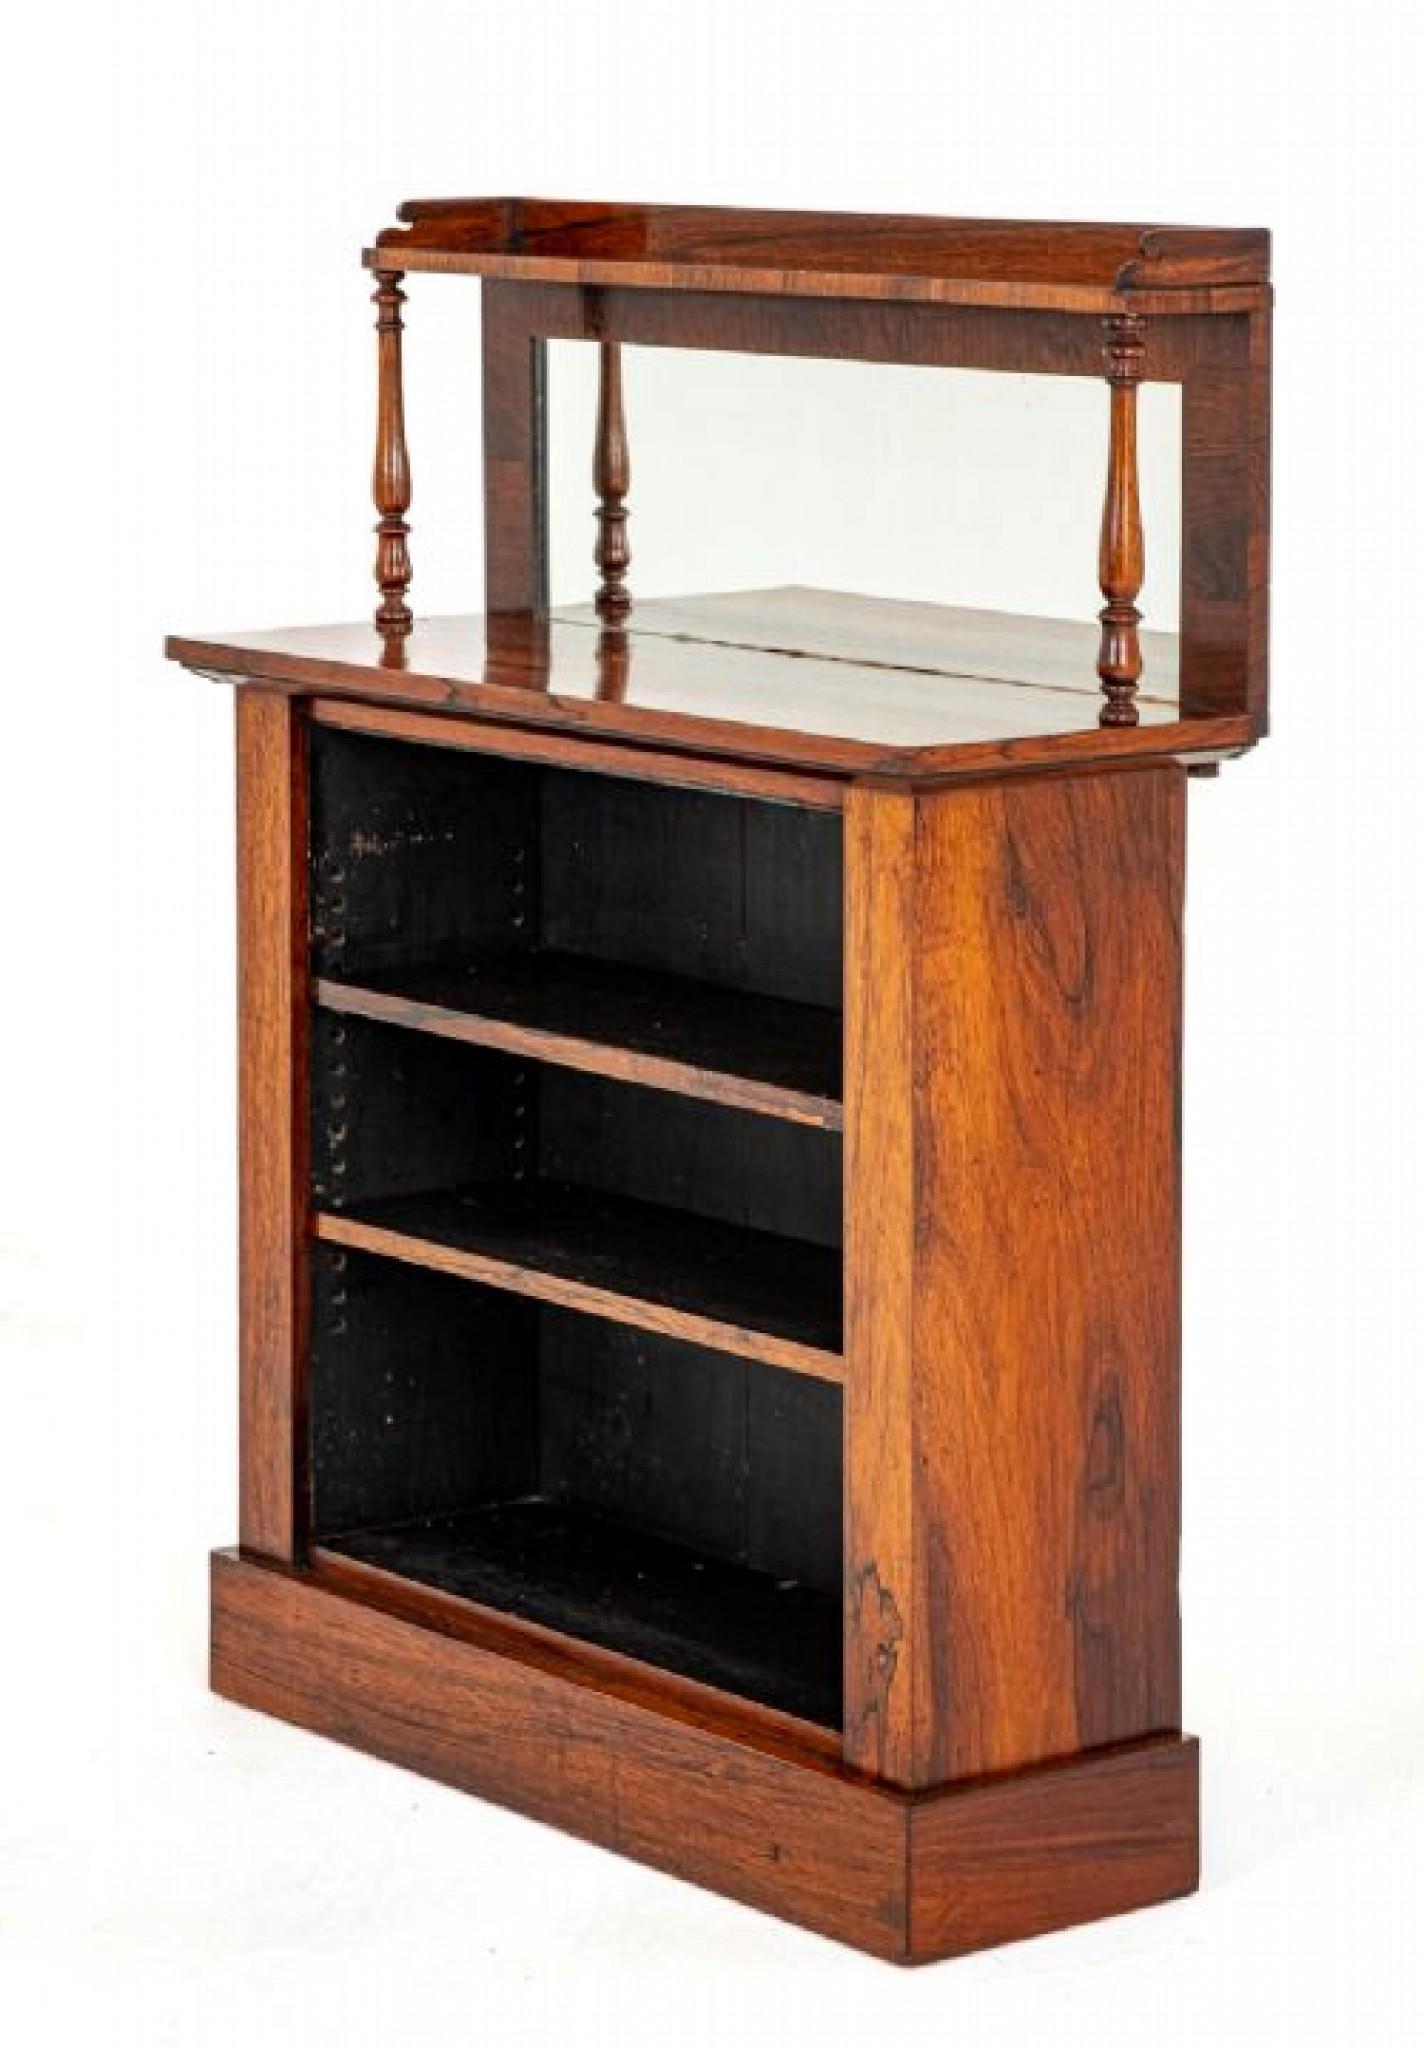 Unusual Early Victorian Open Bookcase.
This Bookcase is Raised Upon a Plinth Base.
Period Victorian
Having 2 Adjustable Shelves.
The Top Section is Supported on Turned Columns with a small Upstand and a Mirrored Back.
Presented in Good Condition.